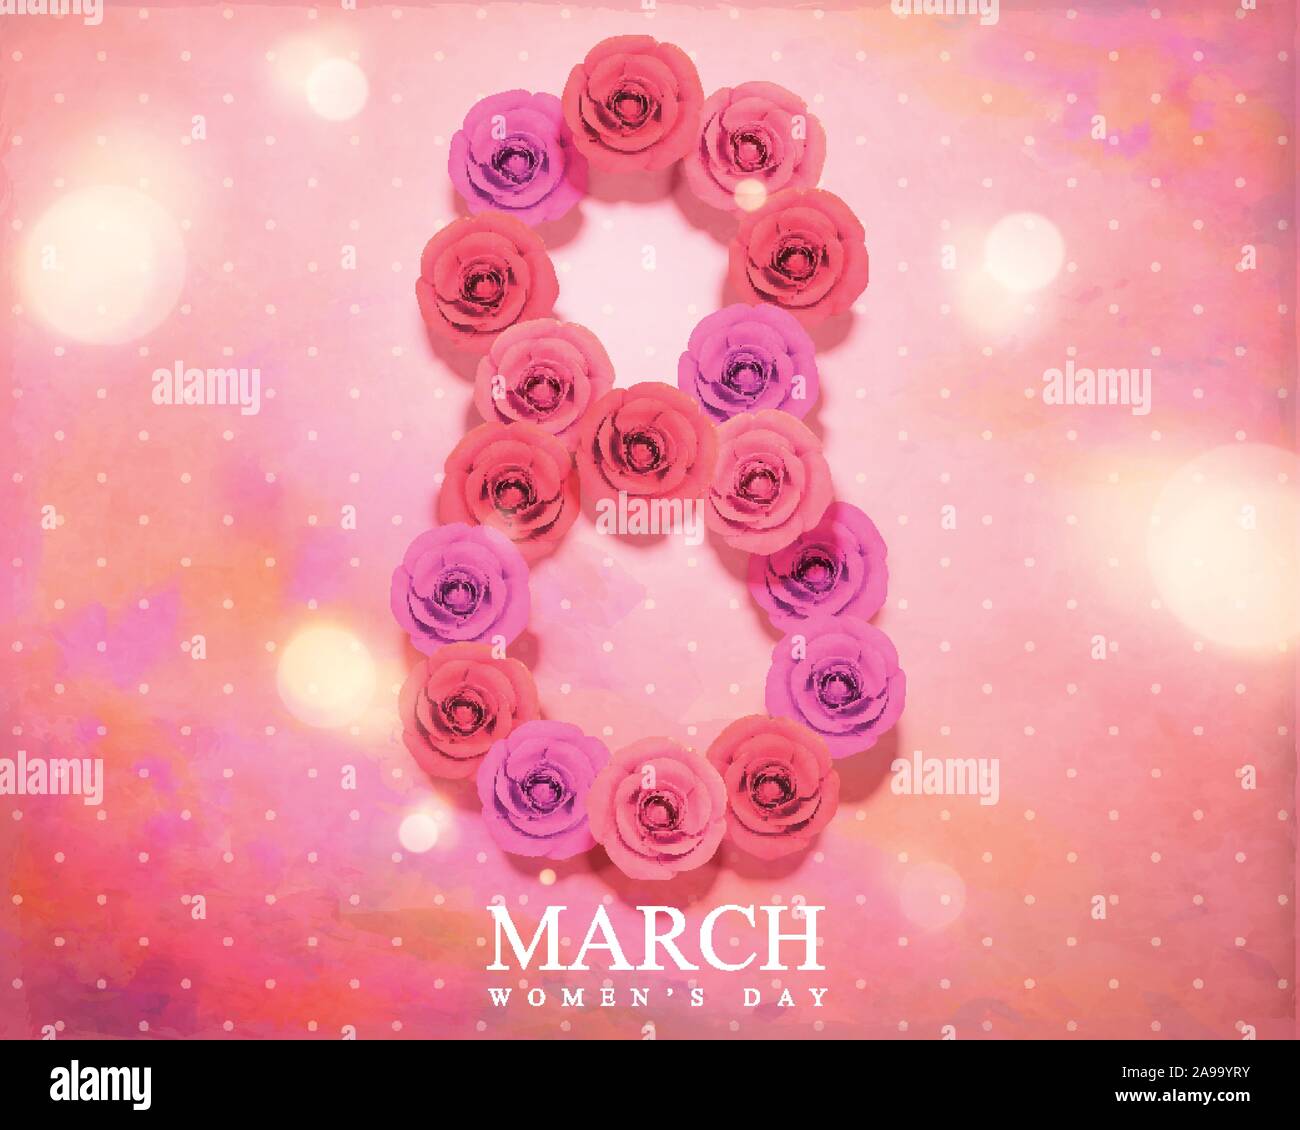 March 8 women's day with roses composed number on bokeh watercolor background Stock Vector